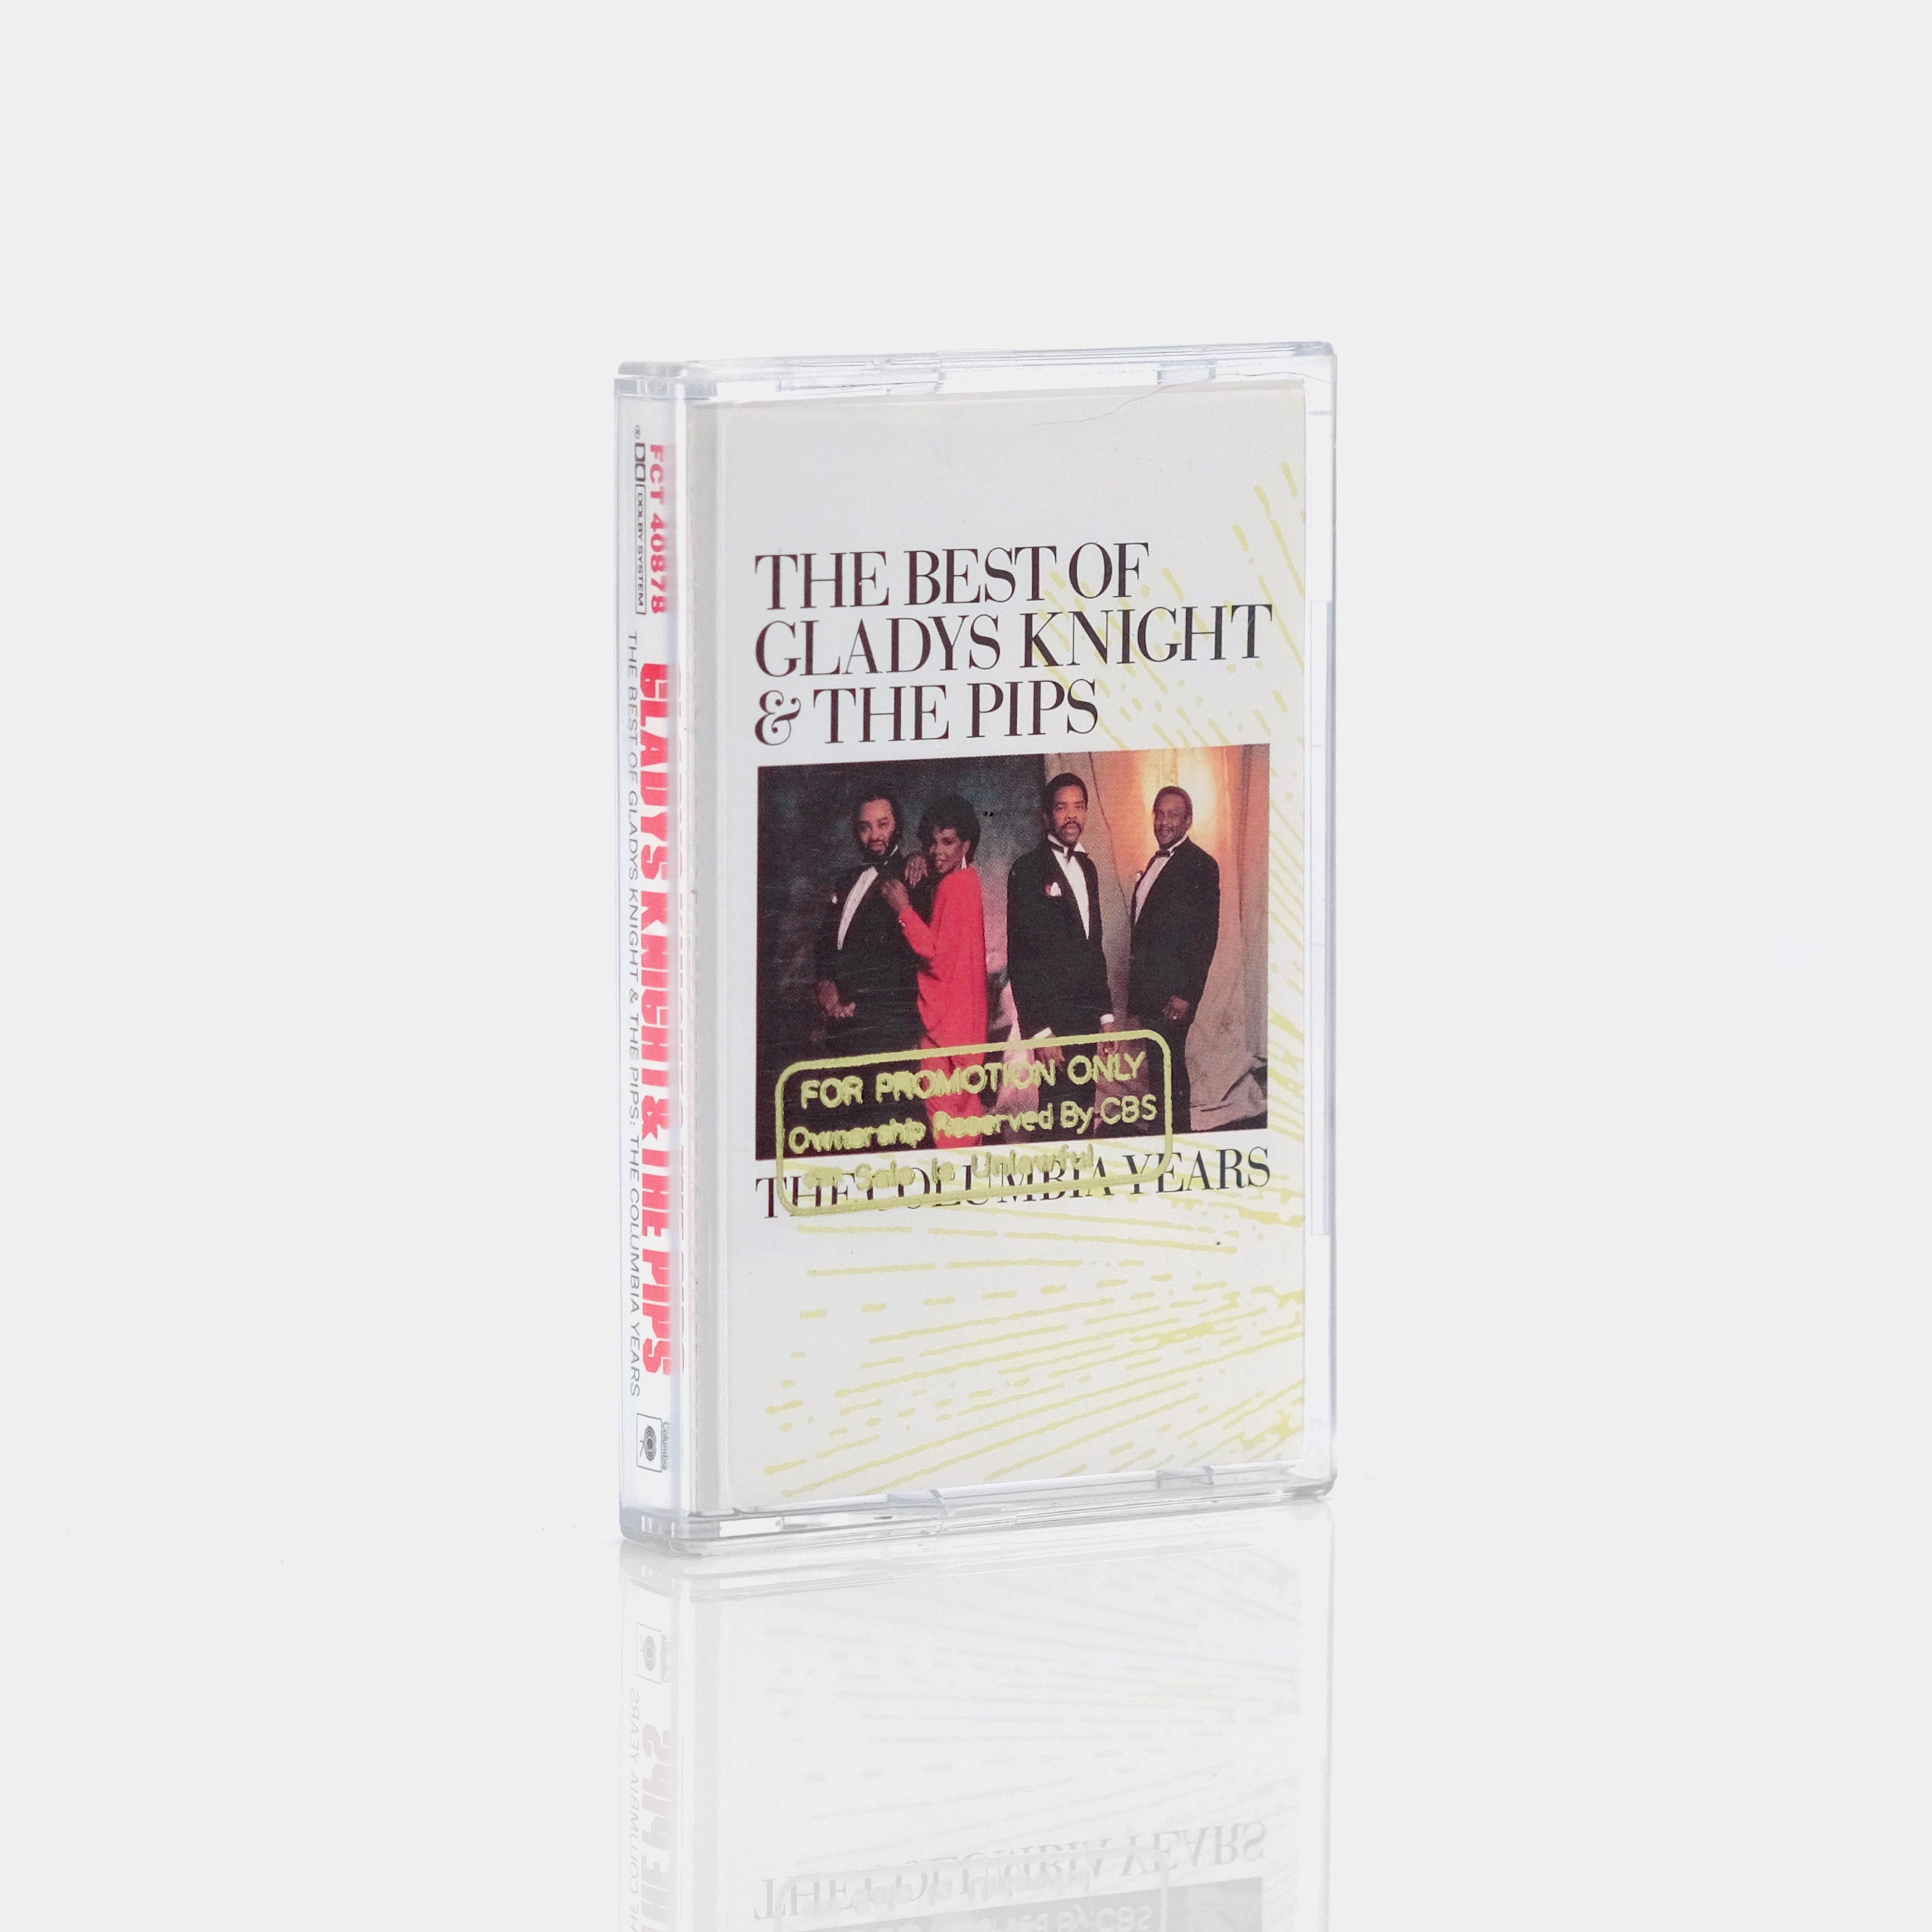 Gladys Knight & The Pips - The Best Of Gladys Knight & The Pips (The Columbia Years) Cassette Tape